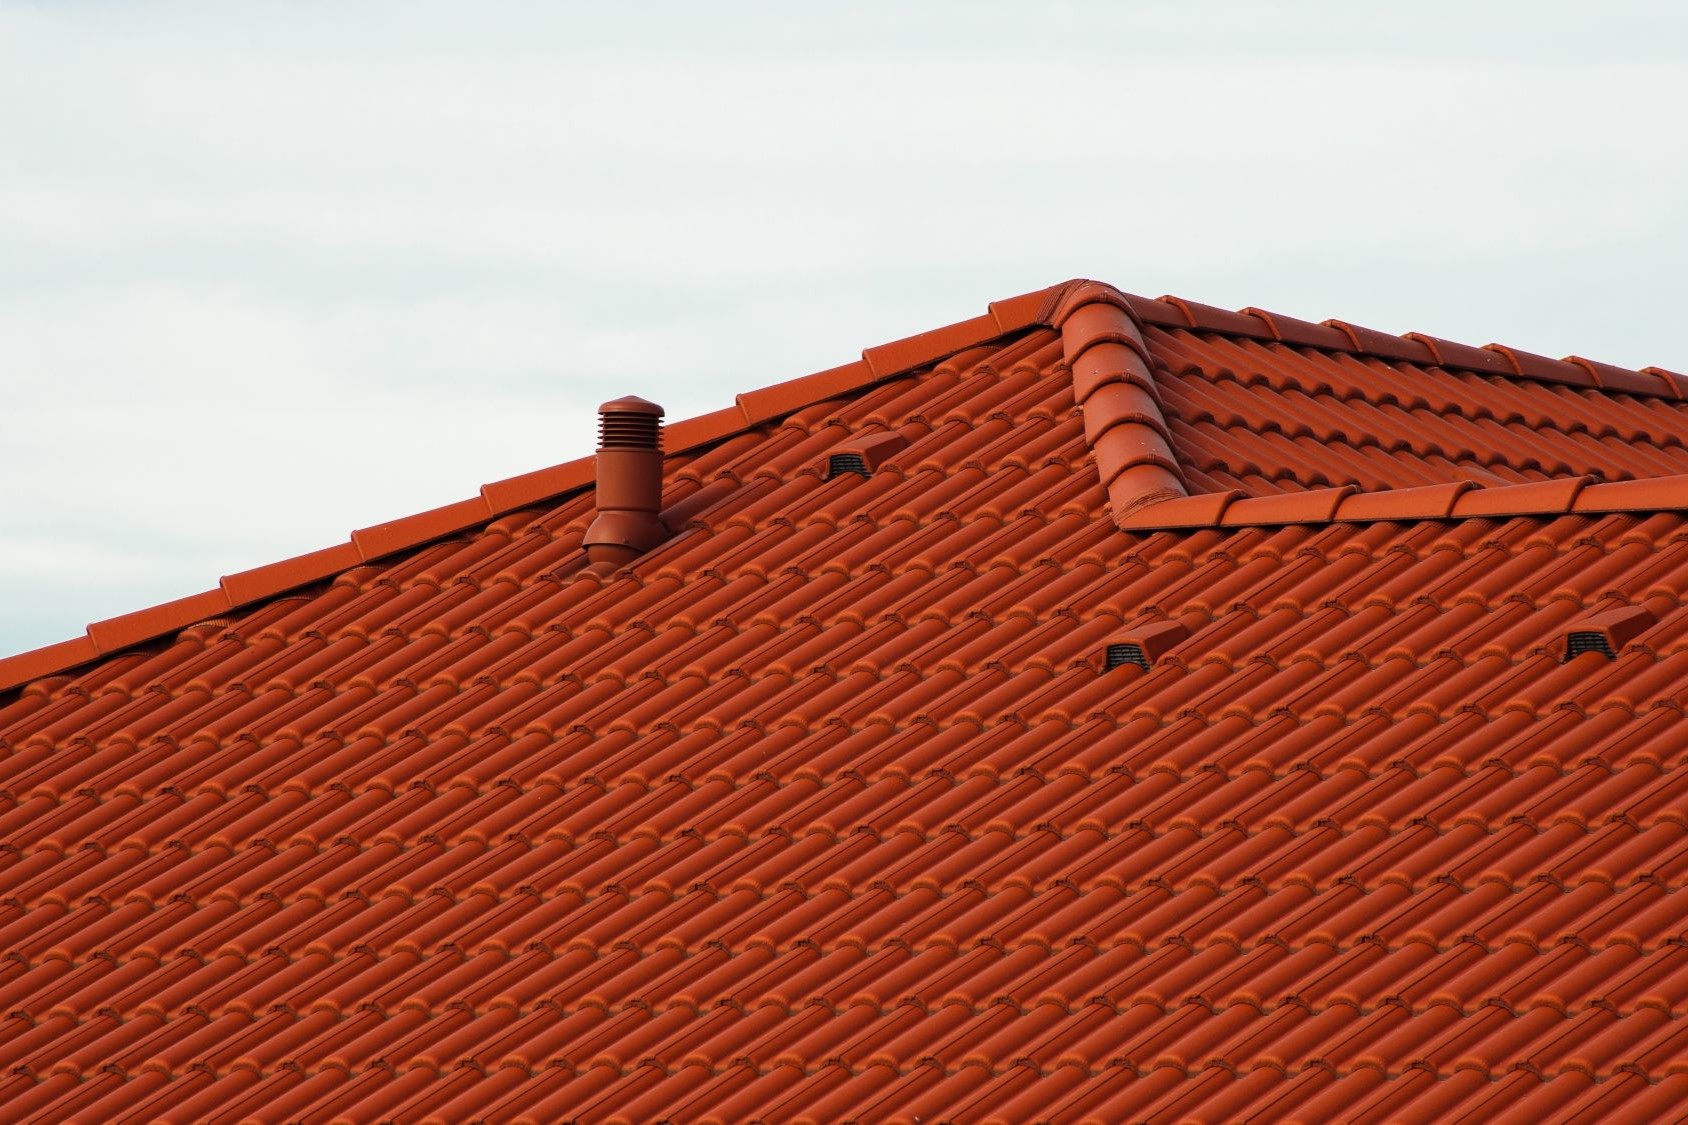 Red roof tiles of an Australian home.